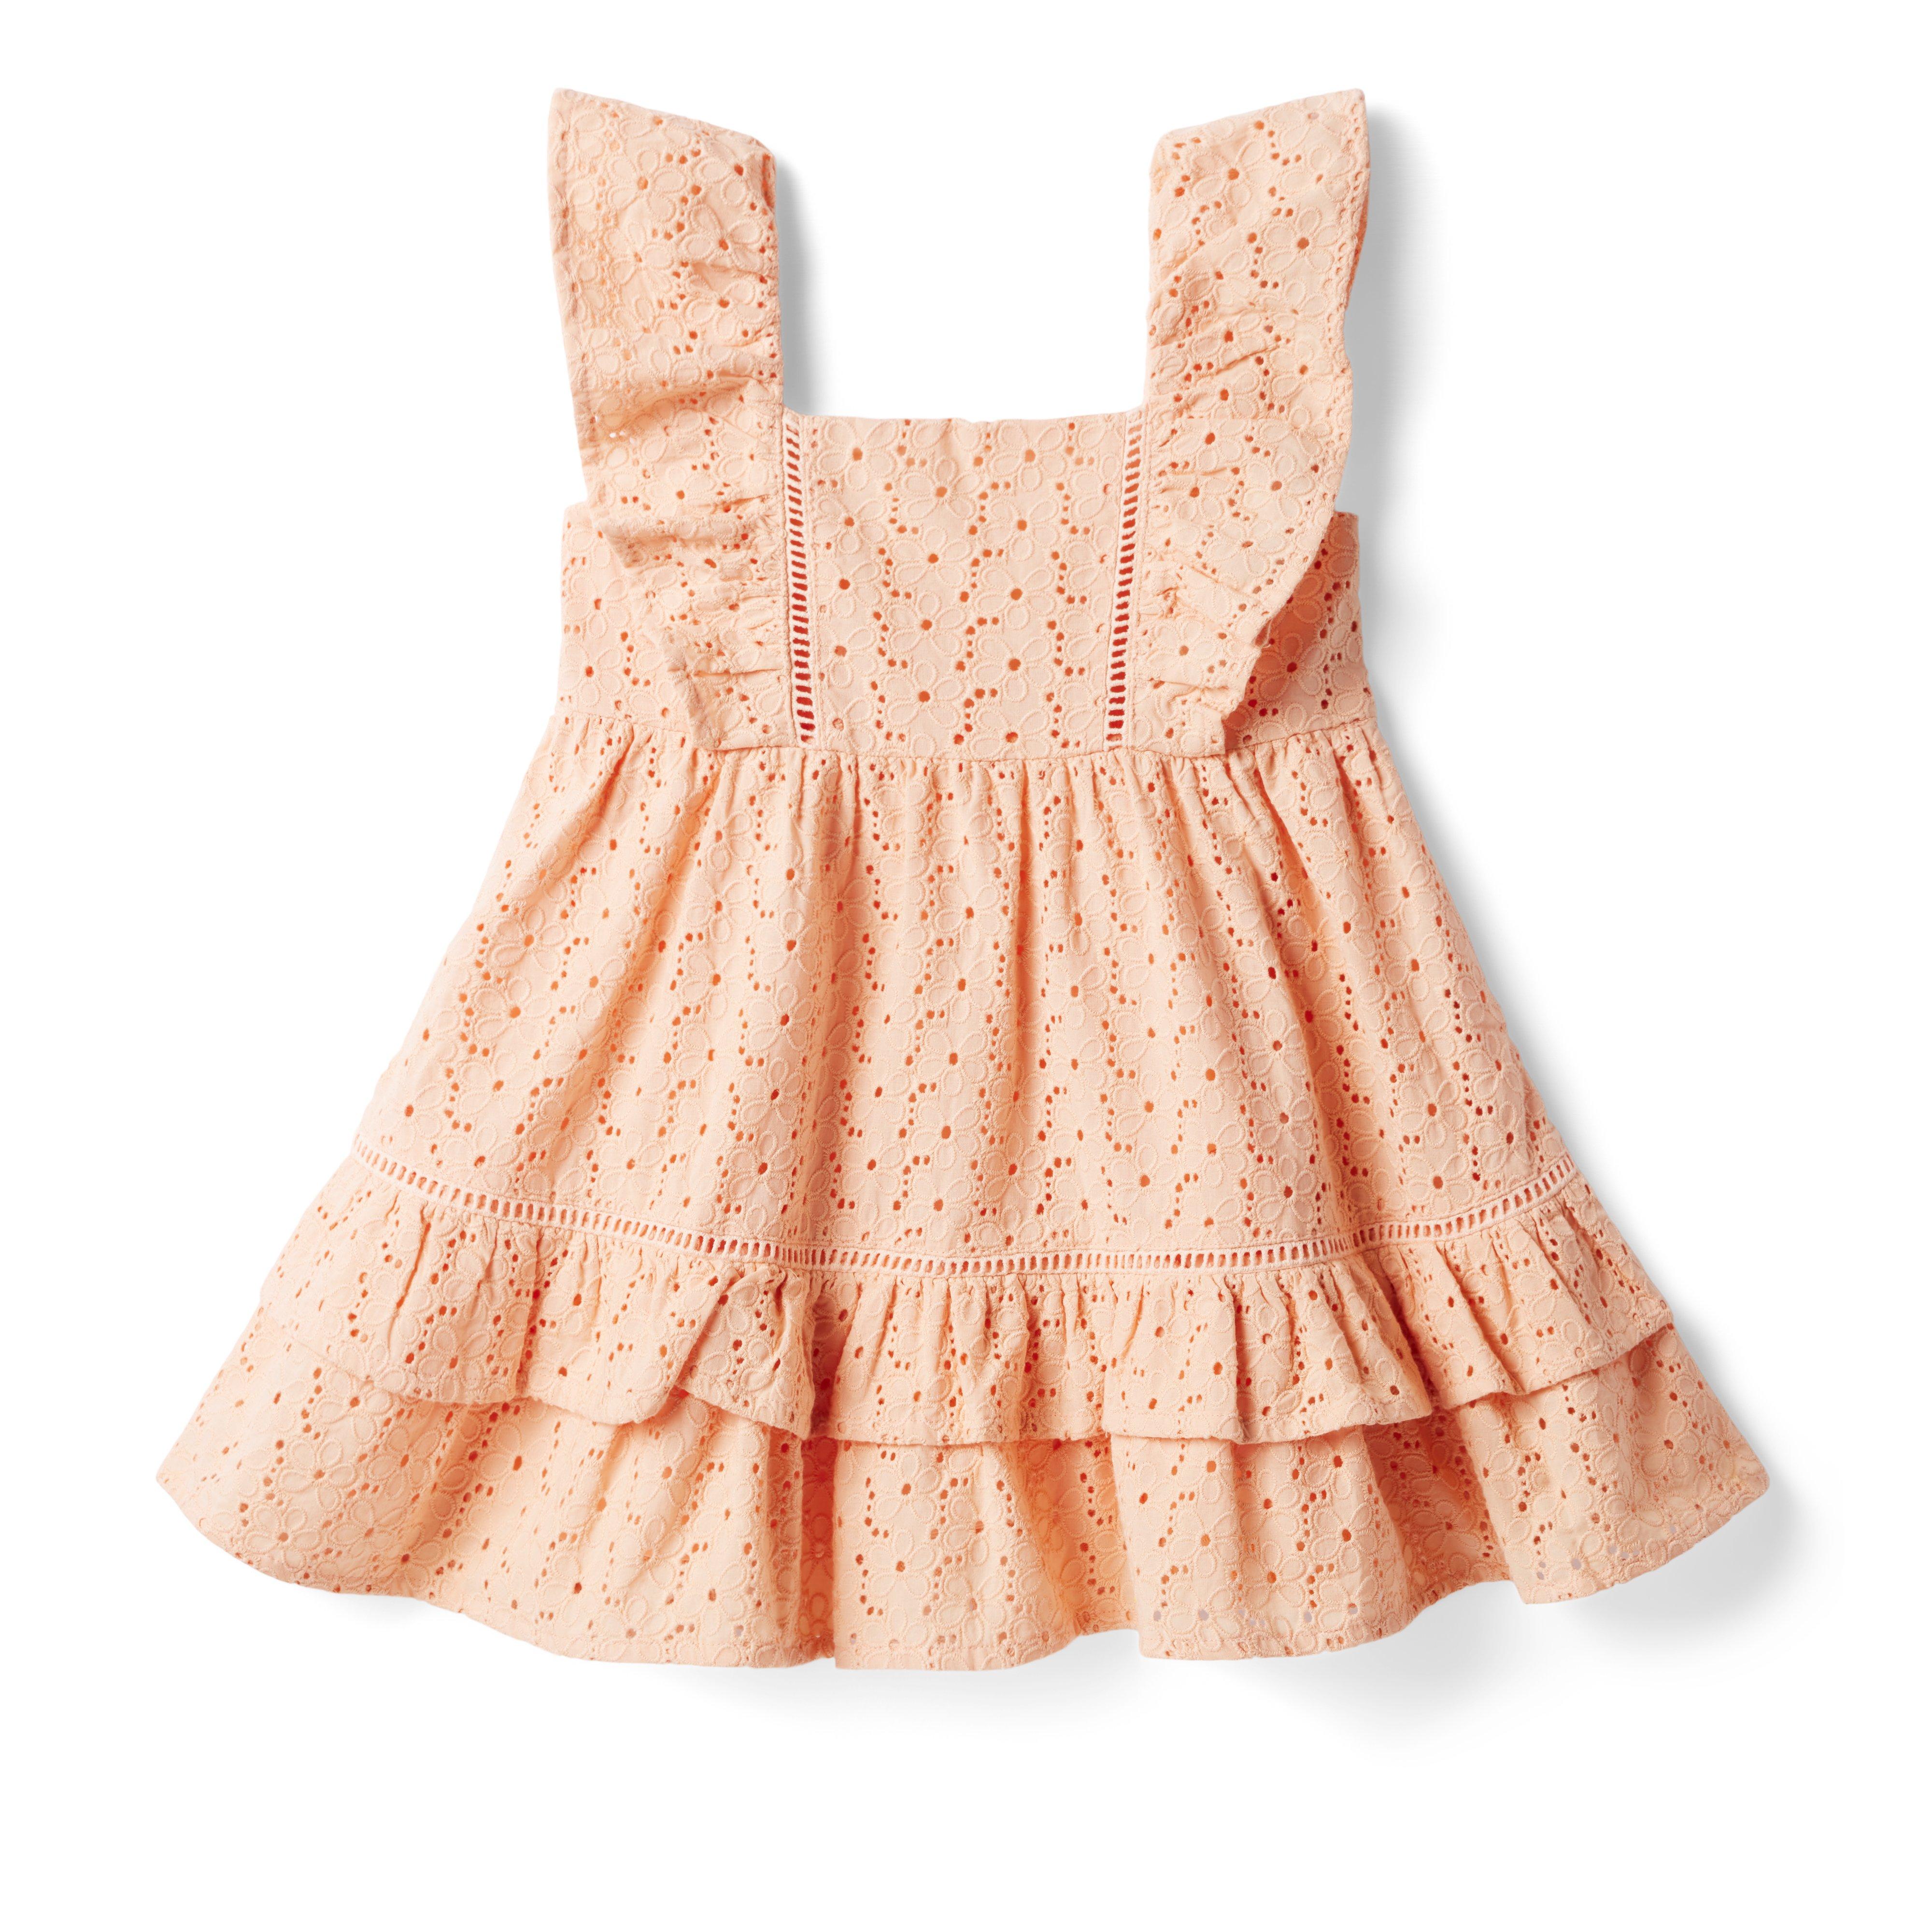 Girl Almost Apricot The Life's A Peach Dress by Janie and Jack